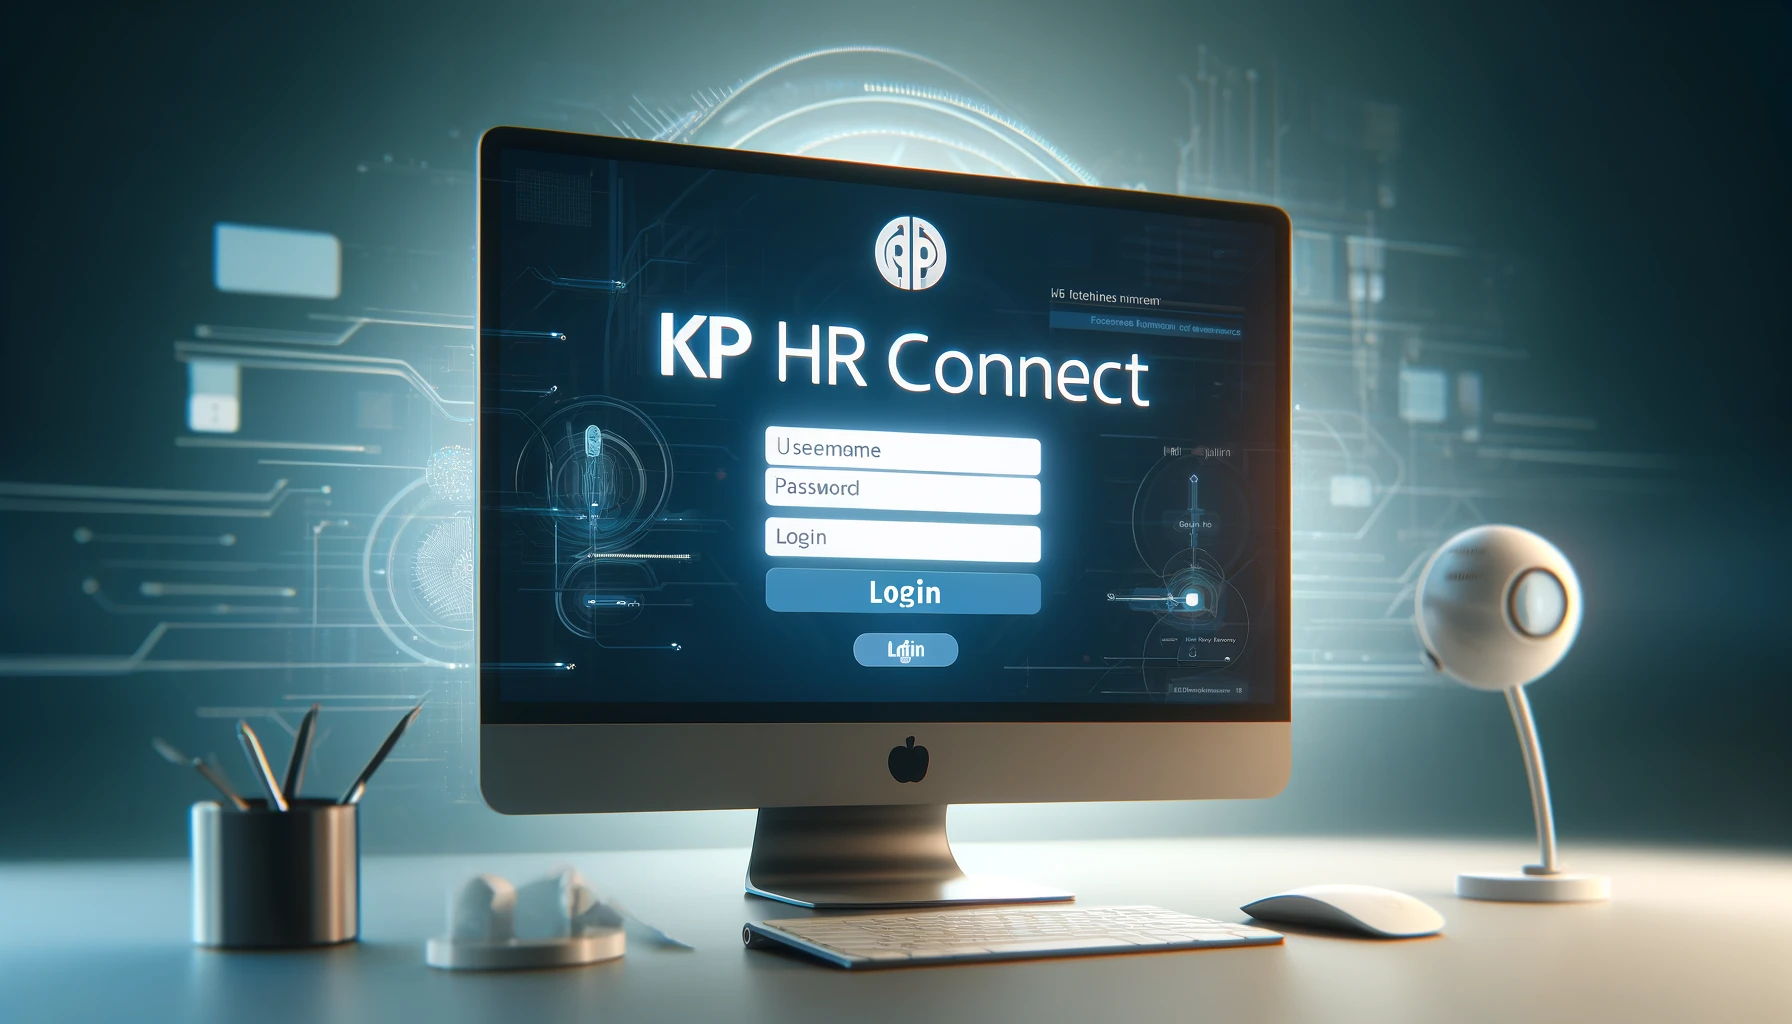 Hr Connect Kaiser Permanente: Guide to Sign in to the KP HR Connect Account